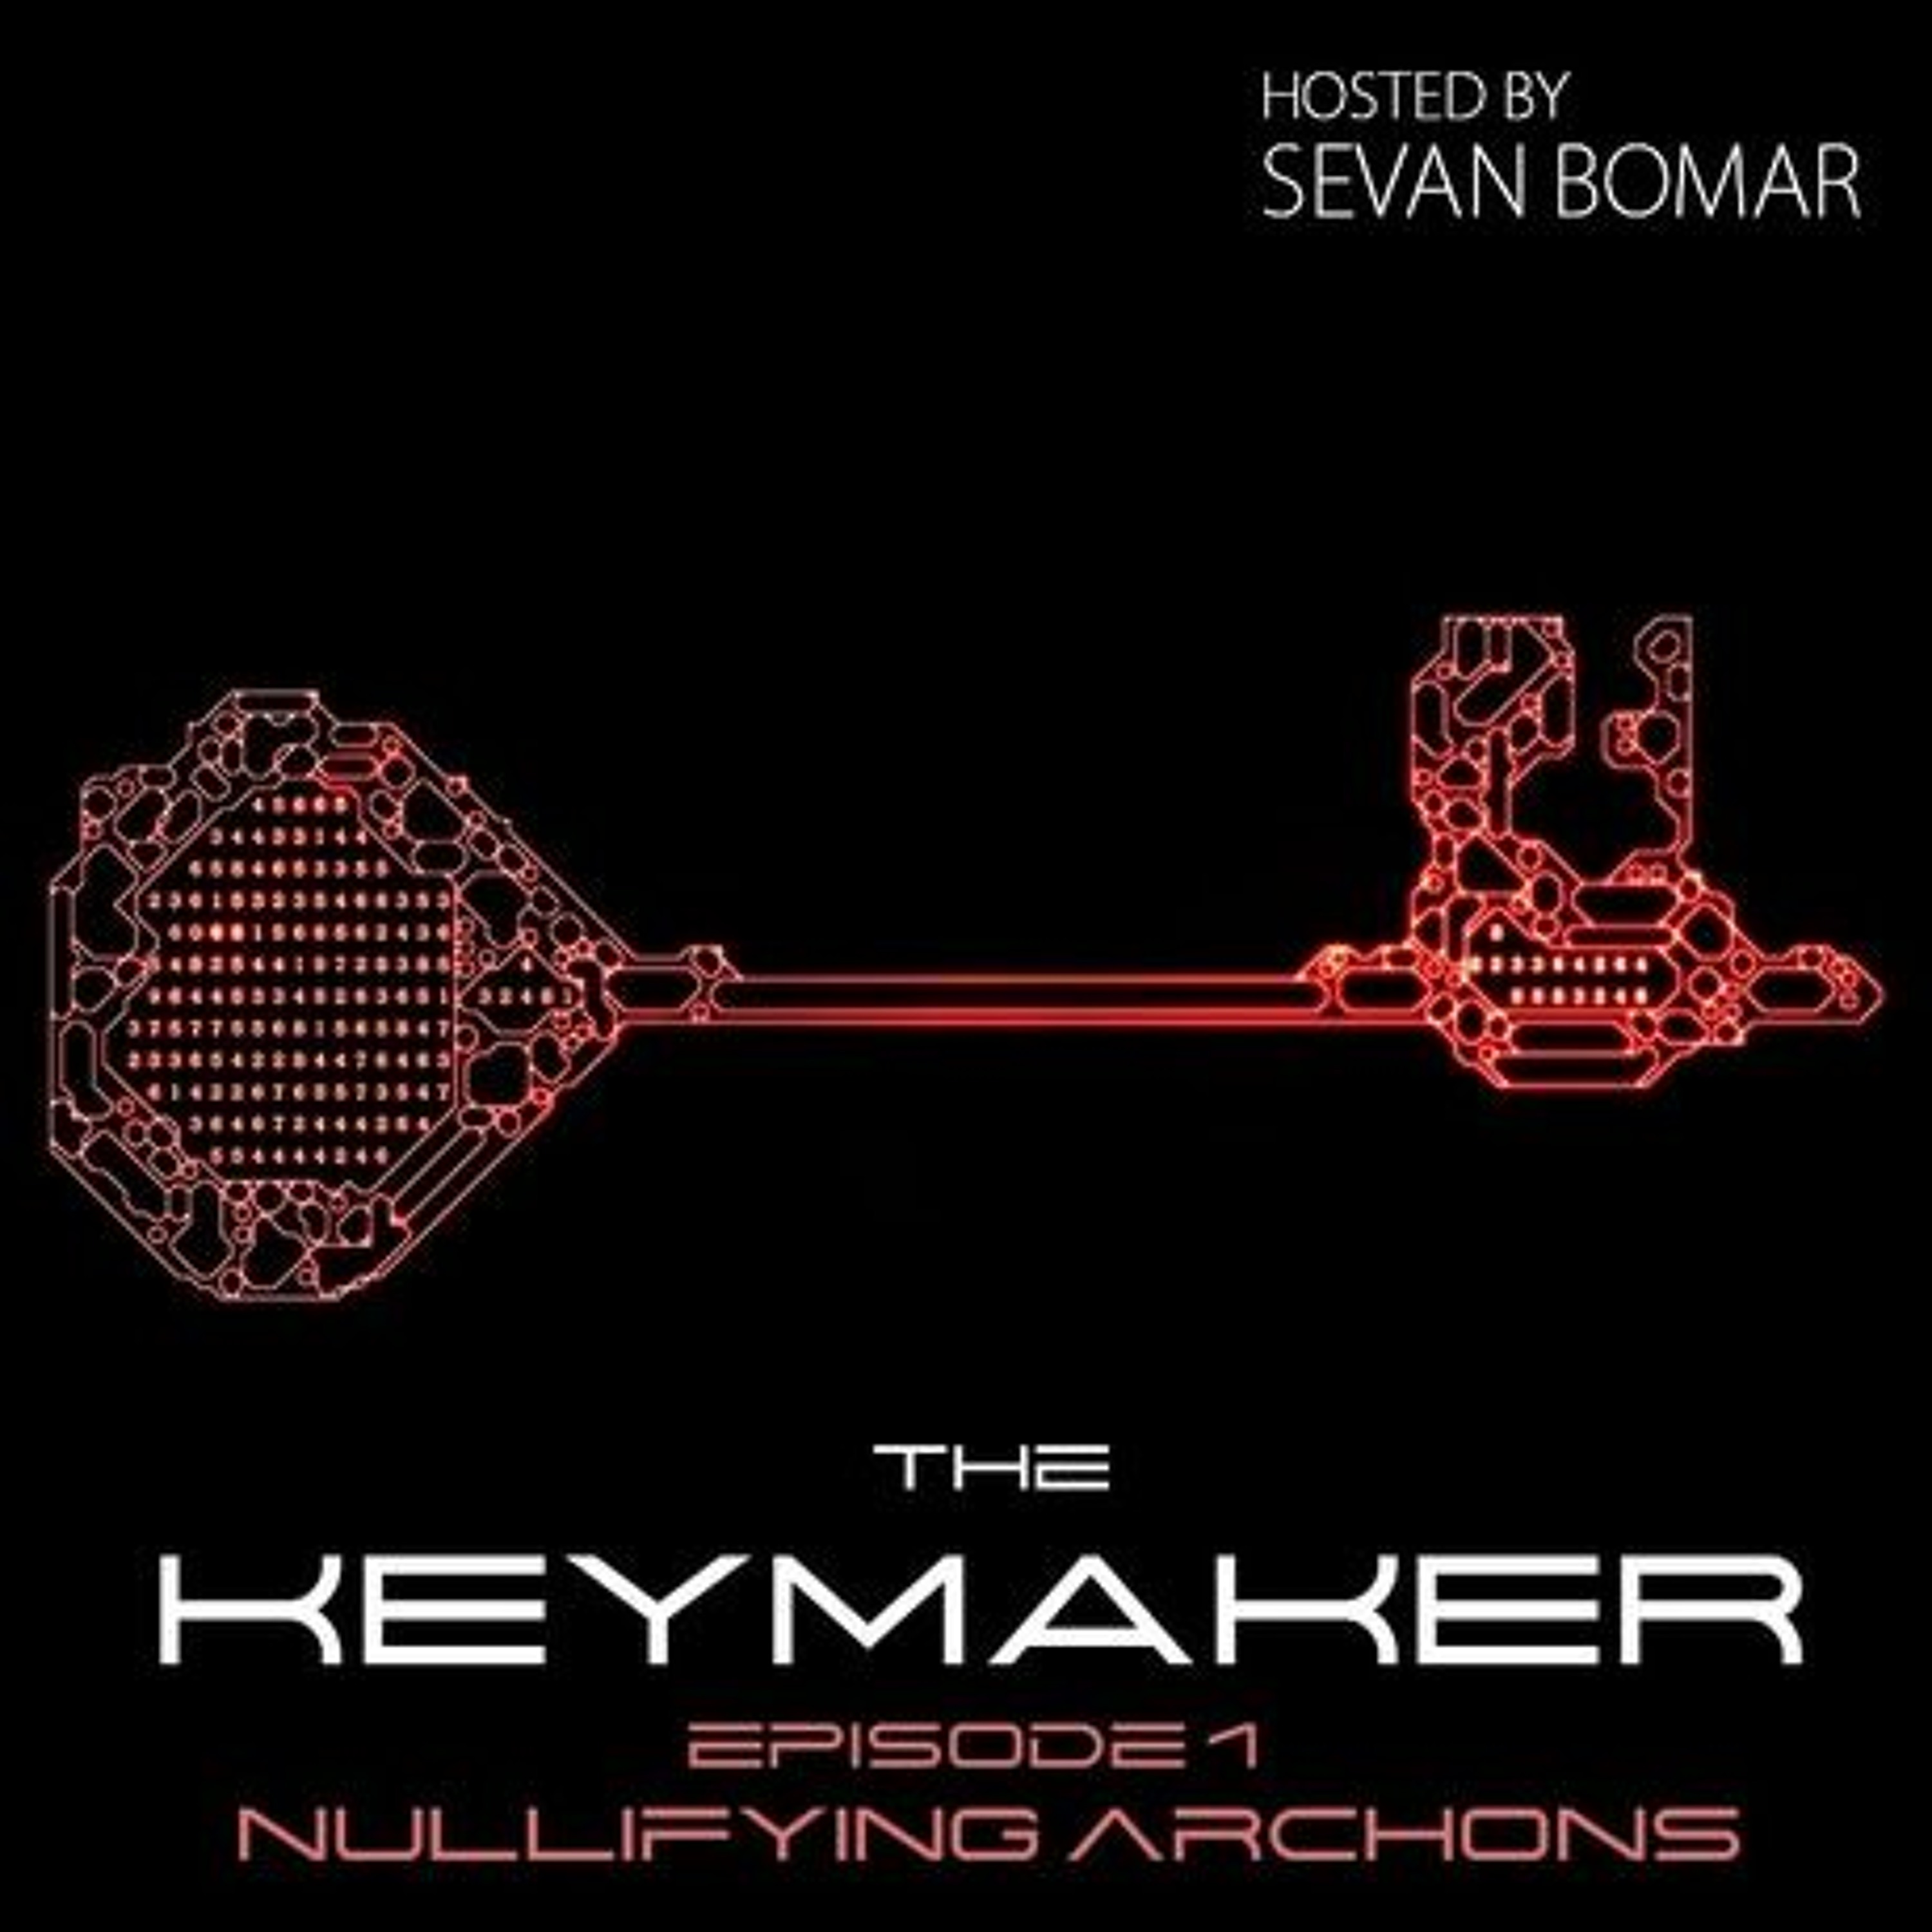 SEVAN BOMAR - THE KEYMAKER, EPISODE 1 - NULLIFYING THE ARCHONIC STRUCTURE - NOV 7 2015